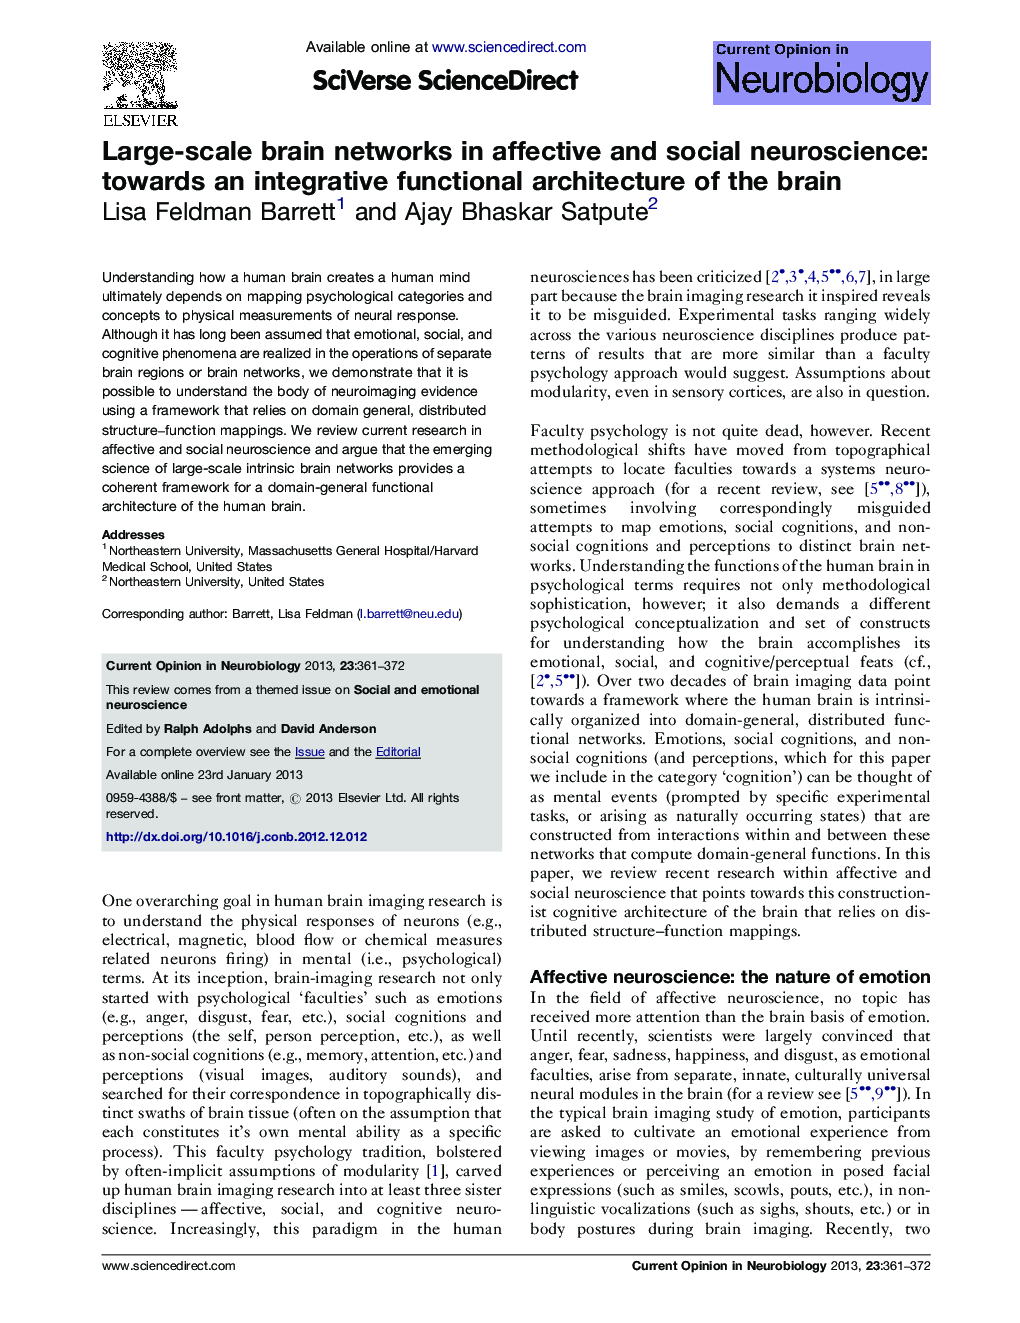 Large-scale brain networks in affective and social neuroscience: towards an integrative functional architecture of the brain